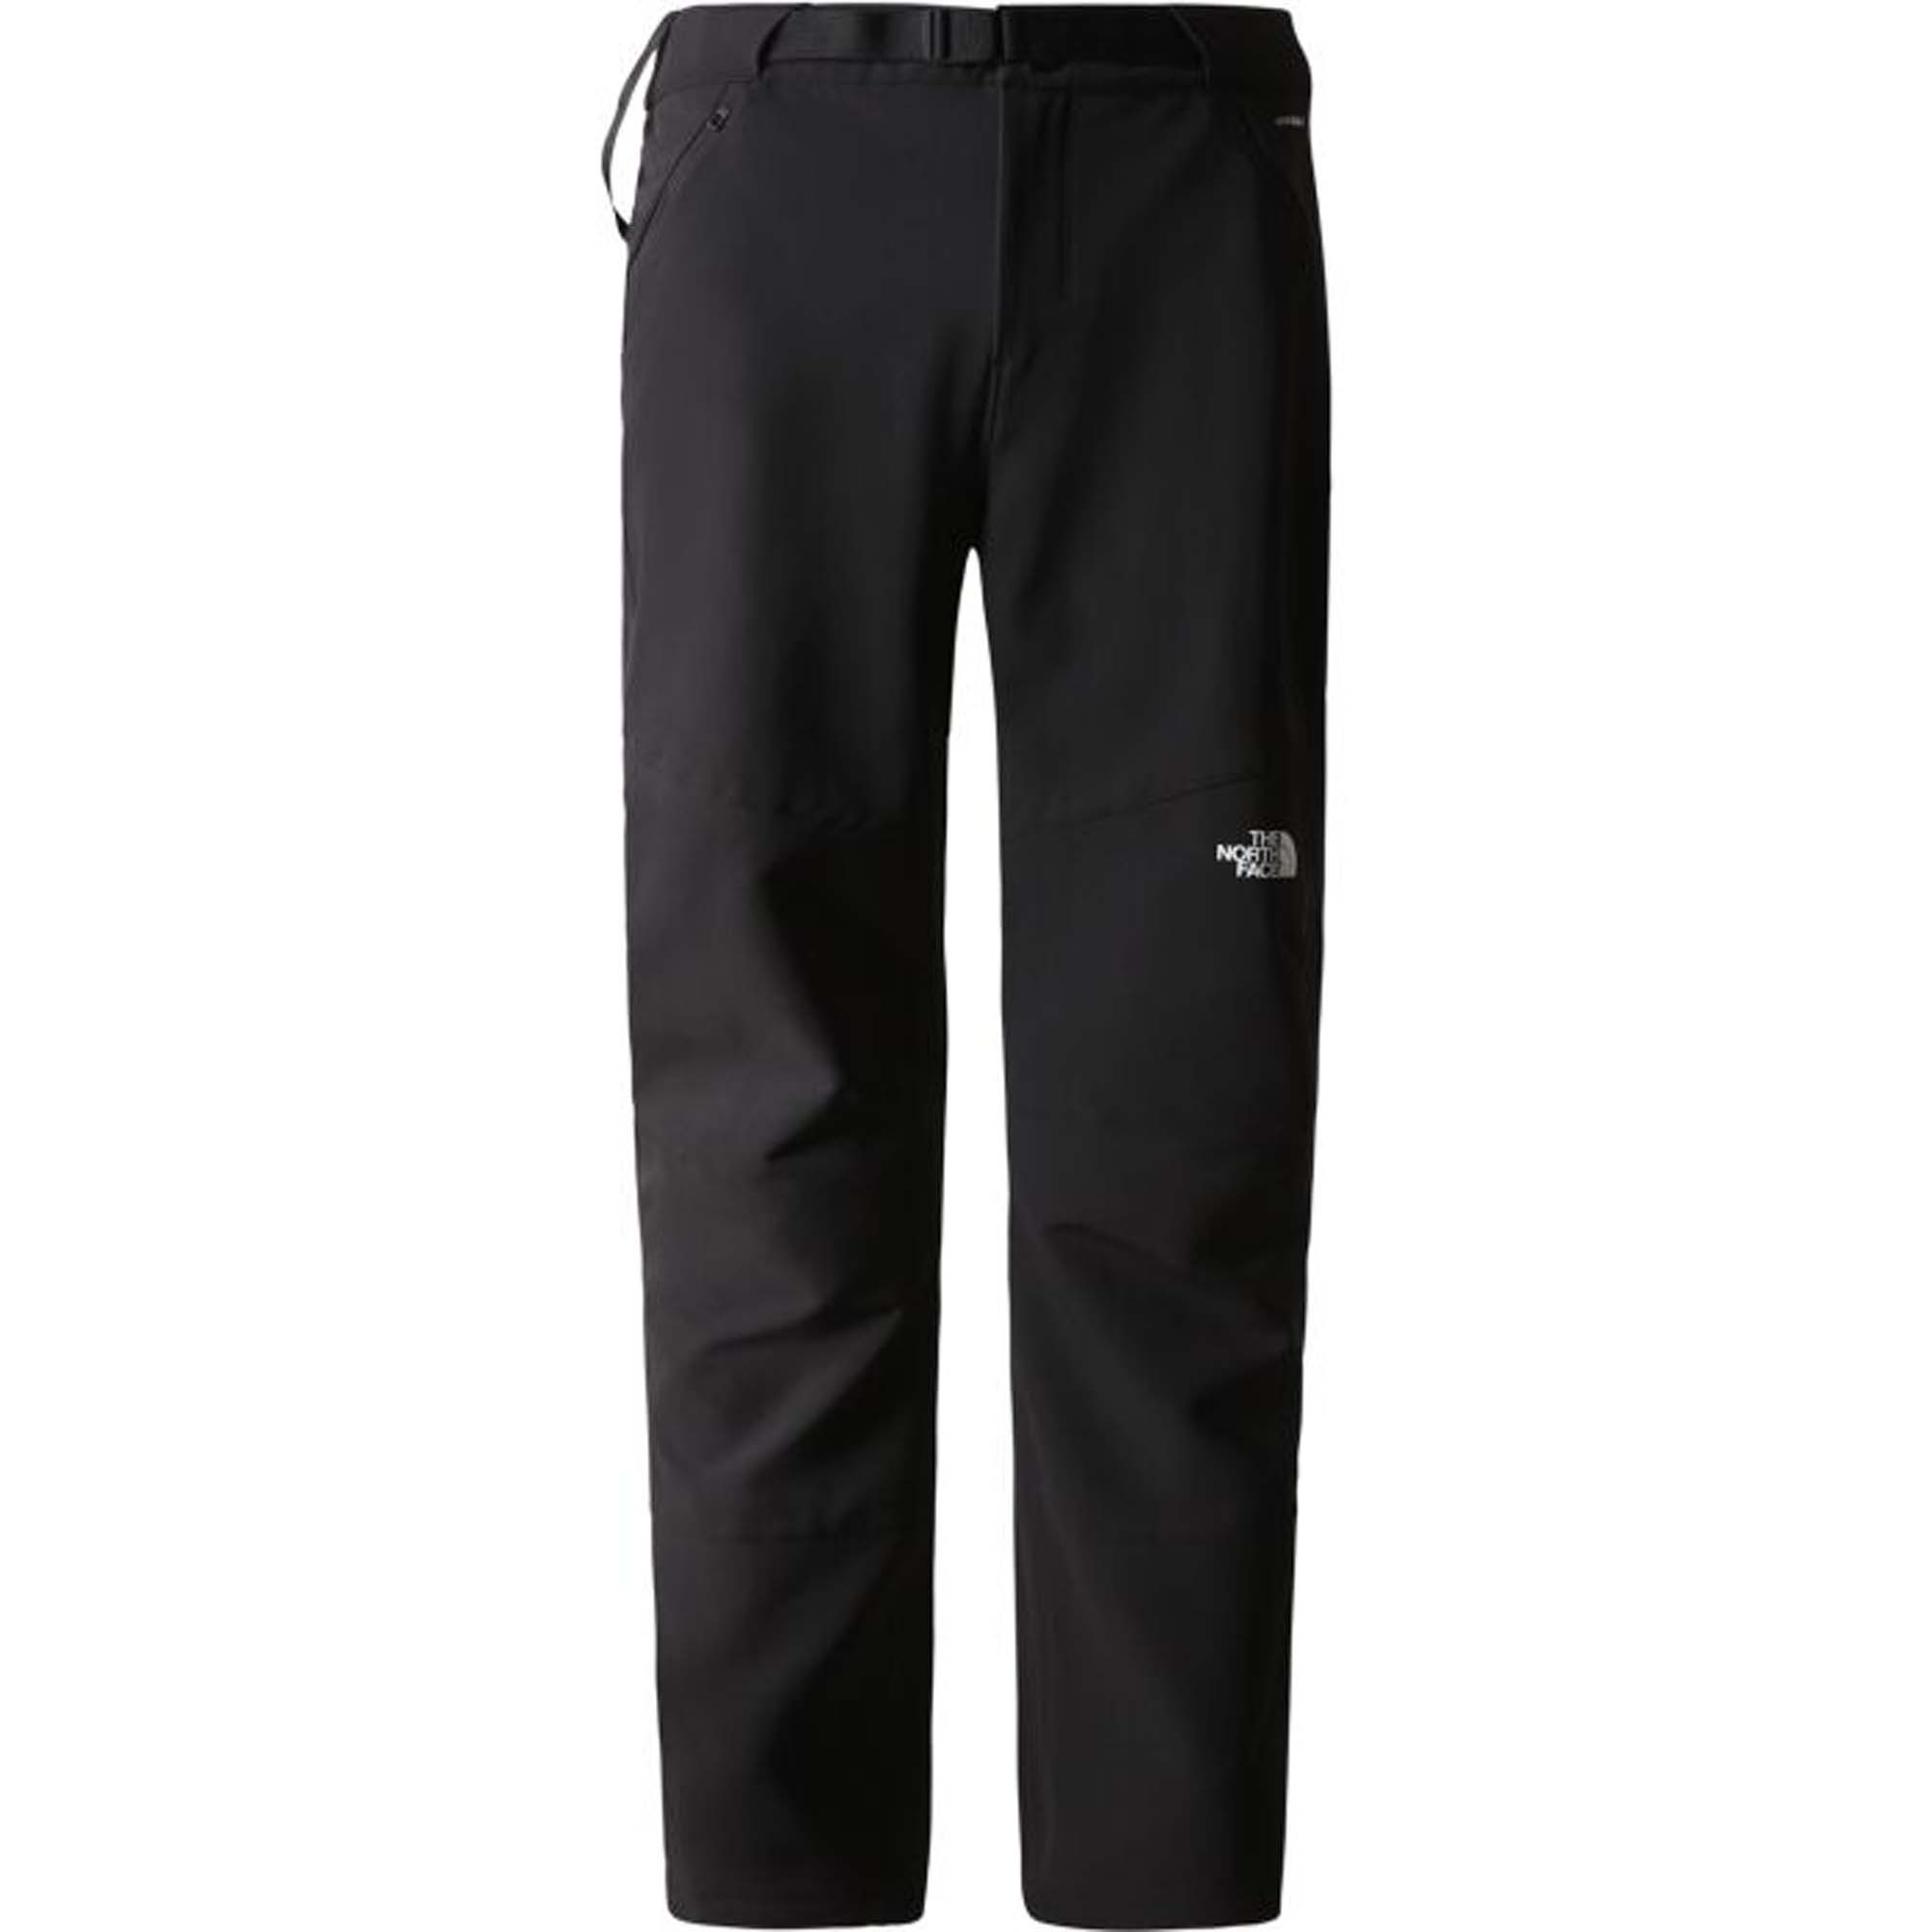 THE NORTH FACE diablo reg tapered pant